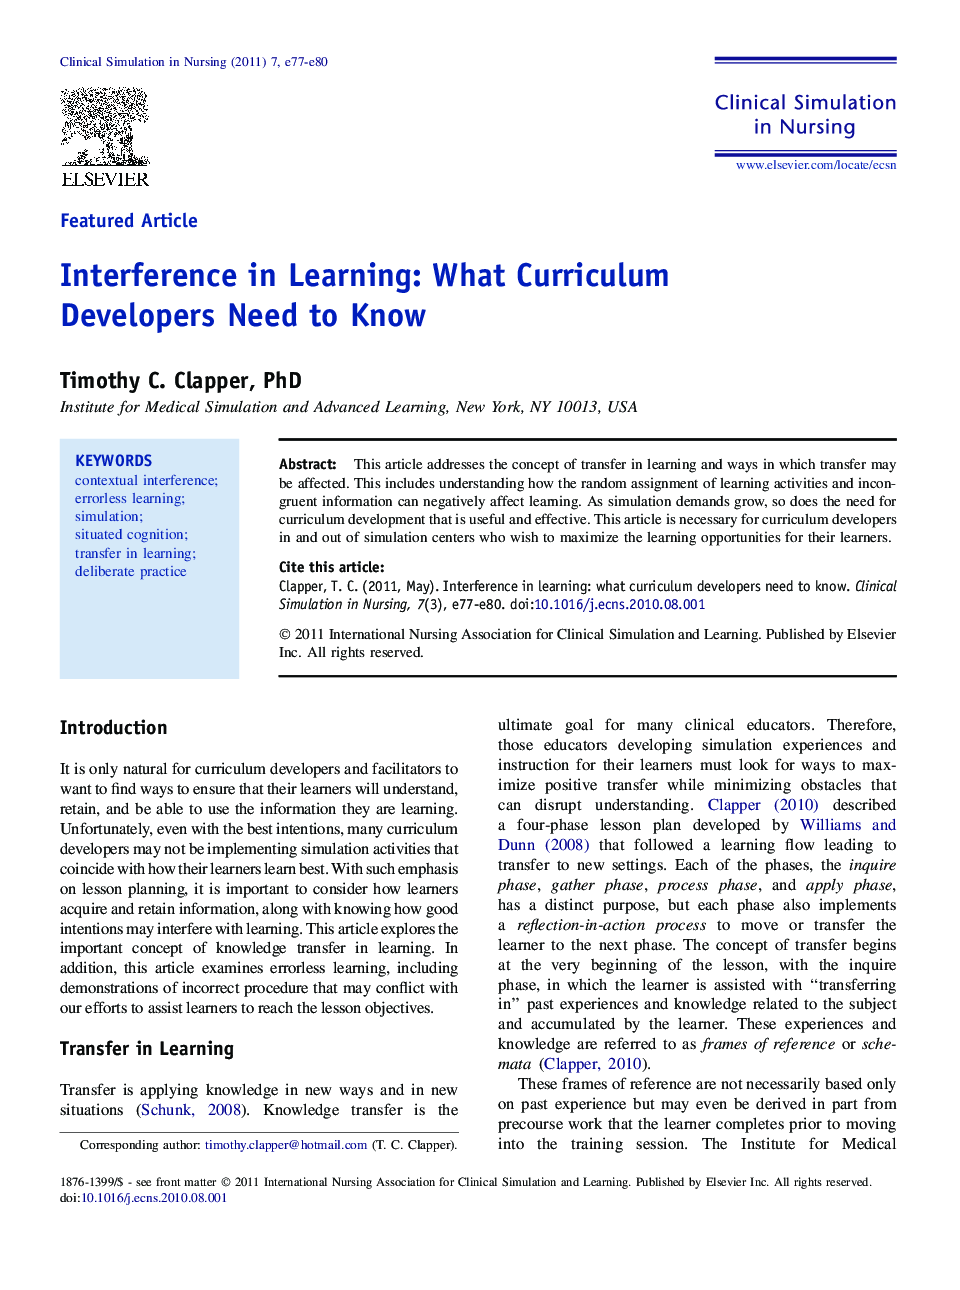 Interference in Learning: What Curriculum Developers Need to Know